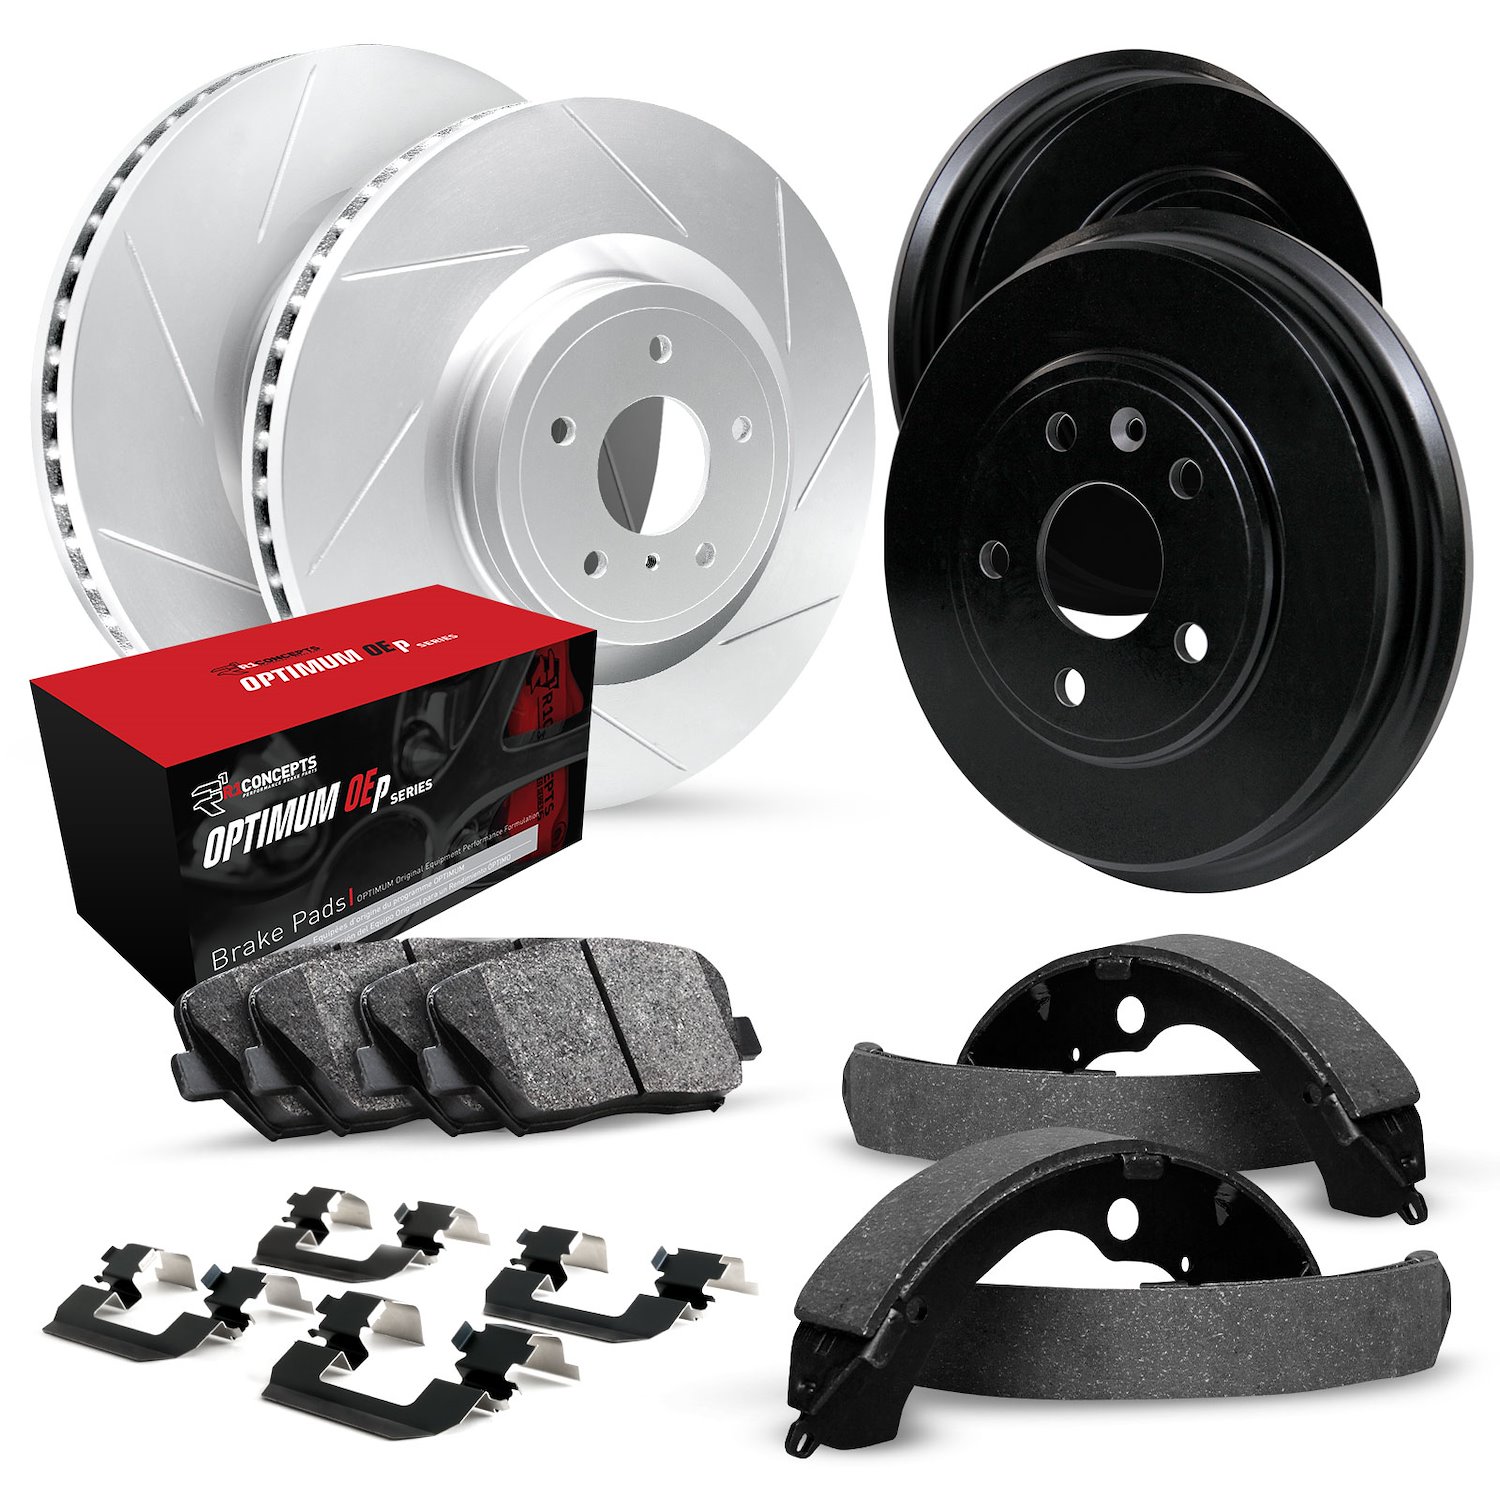 GEO-Carbon Slotted Brake Rotor & Drum Set w/Optimum OE Pads, Shoes, & Hardware, 1975-1975 GM, Position: Front & Rear